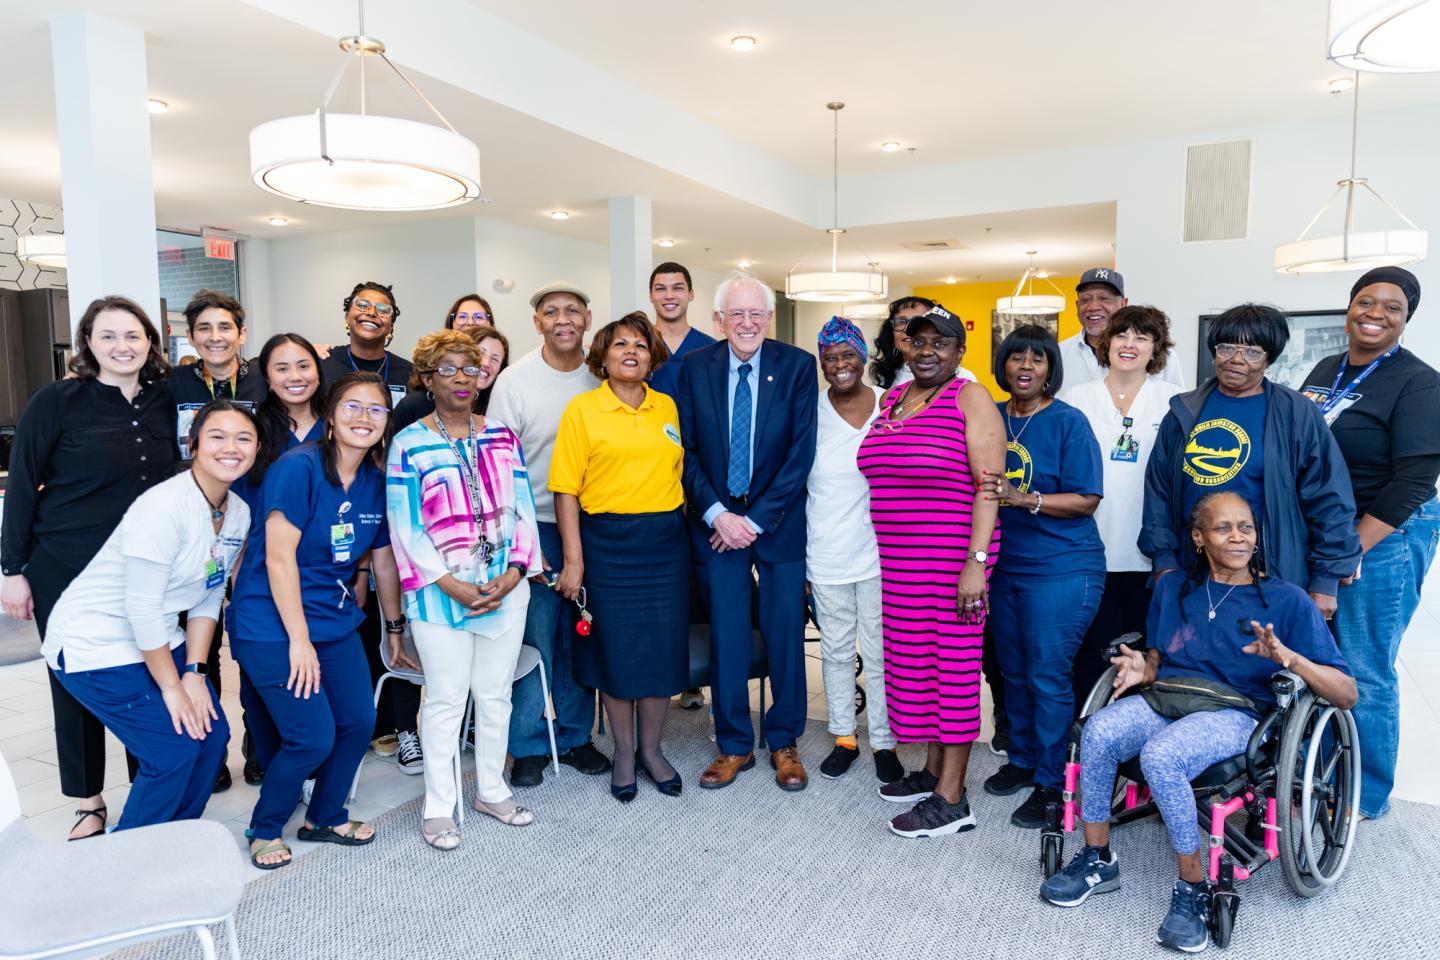 U.S. Sen. Bernie Sanders poses with a group of Baltimore residents.